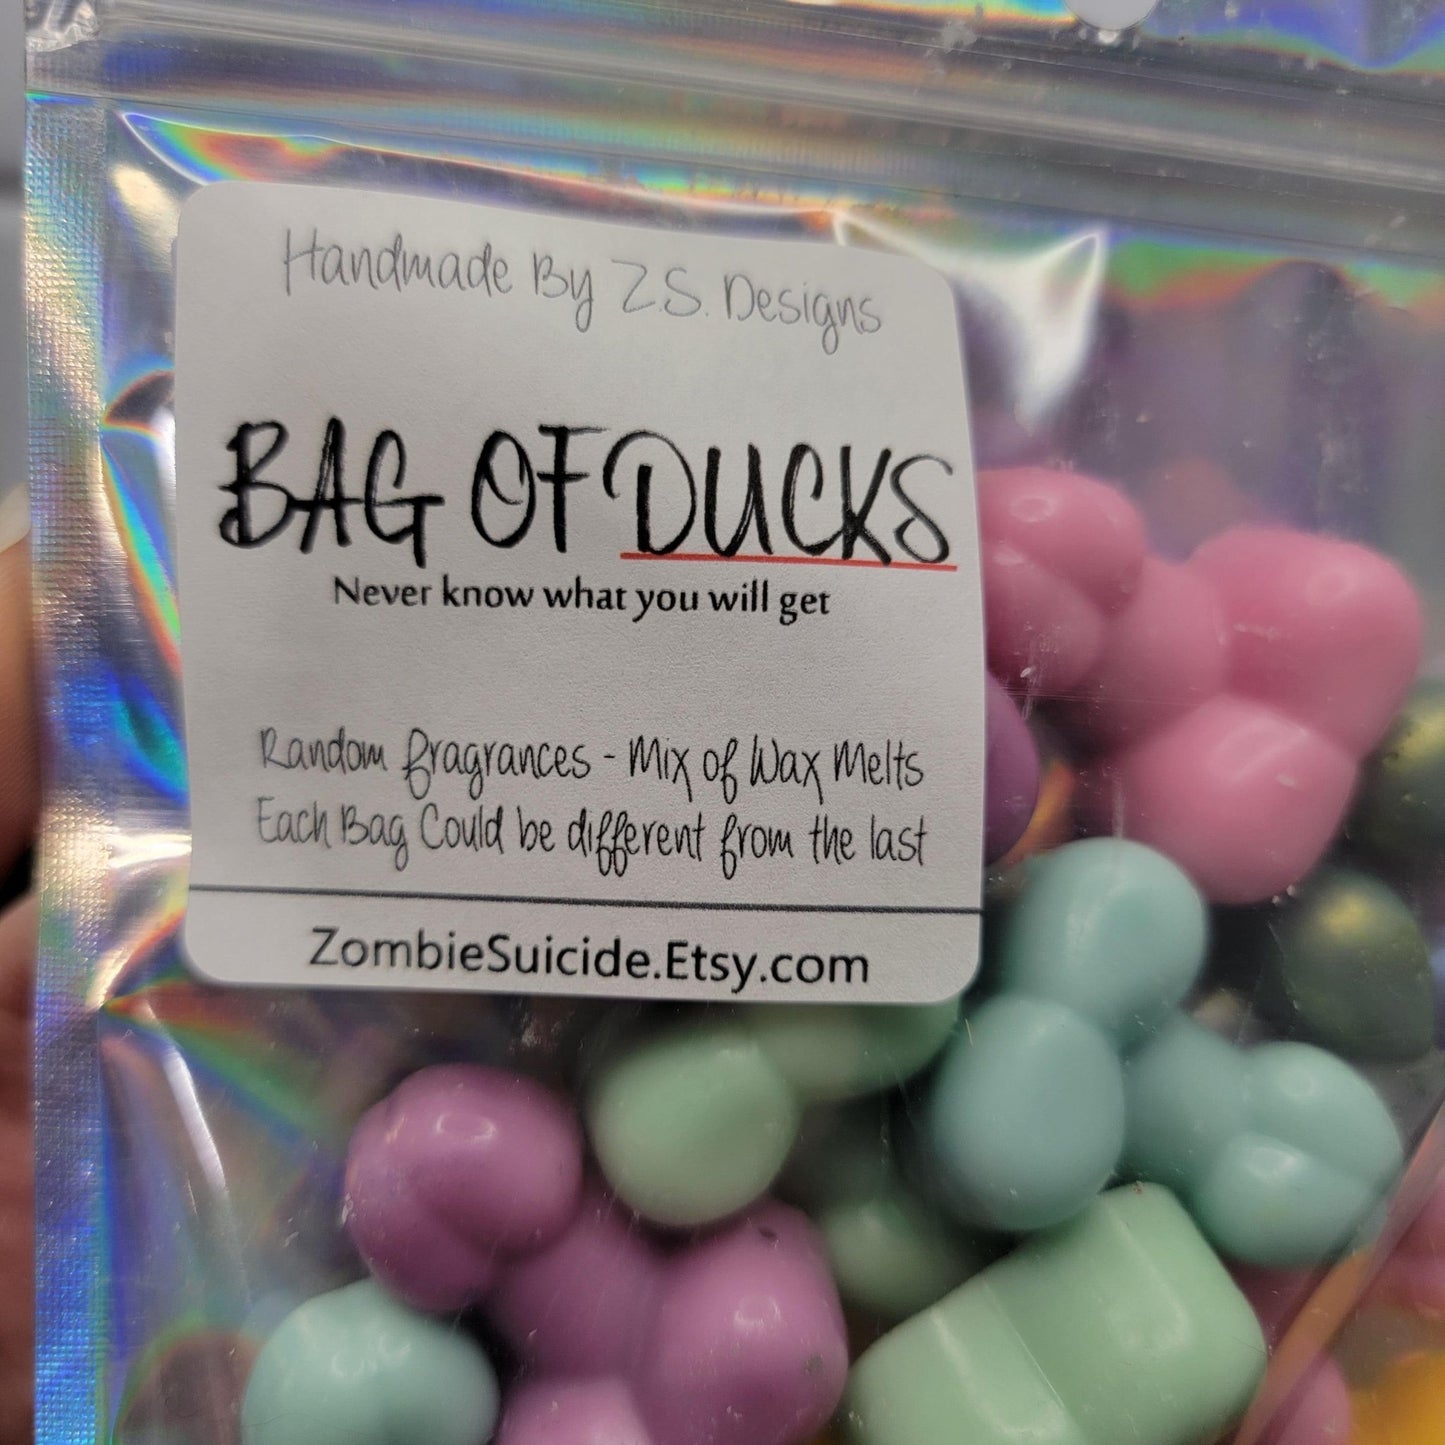  small packages co wax melts|zombicides.com/